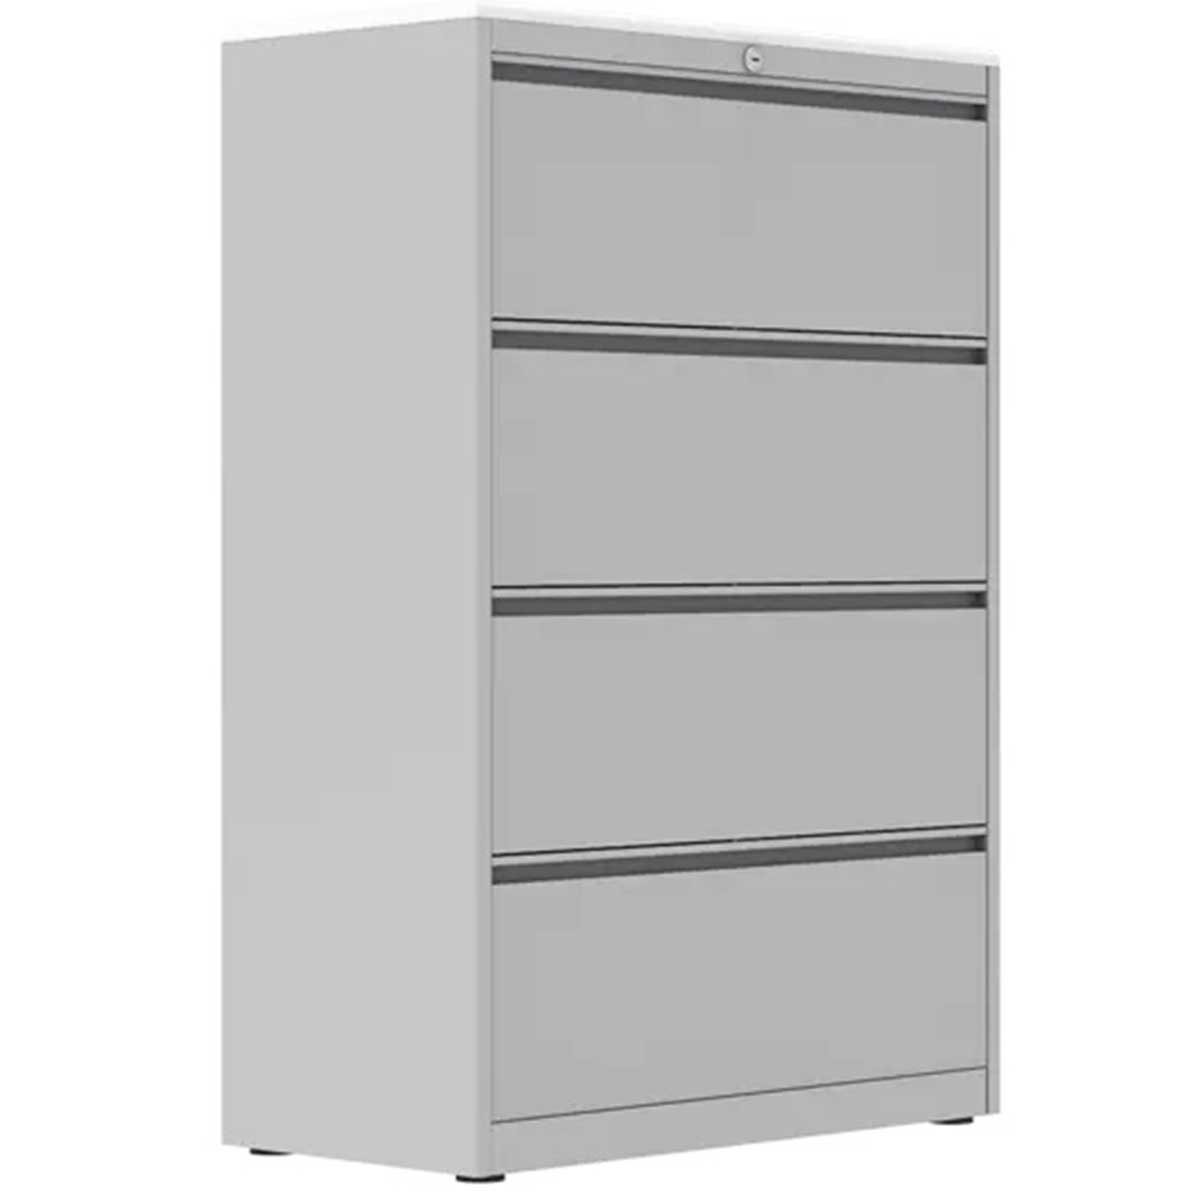 Fire Resistant File Cabinet Manufacturers, Suppliers in Tilak Marg